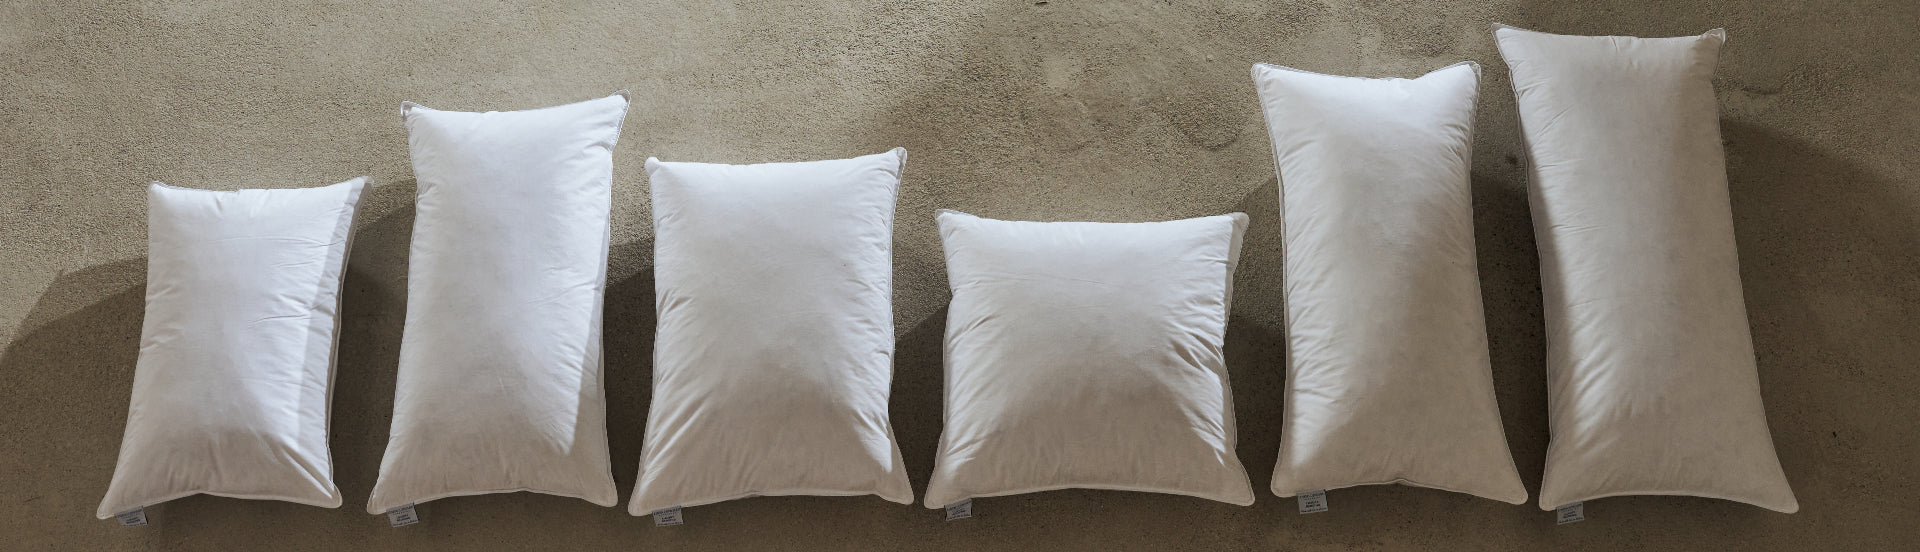 Pillow Size Guide | Pillow Sizes | What Size Pillow